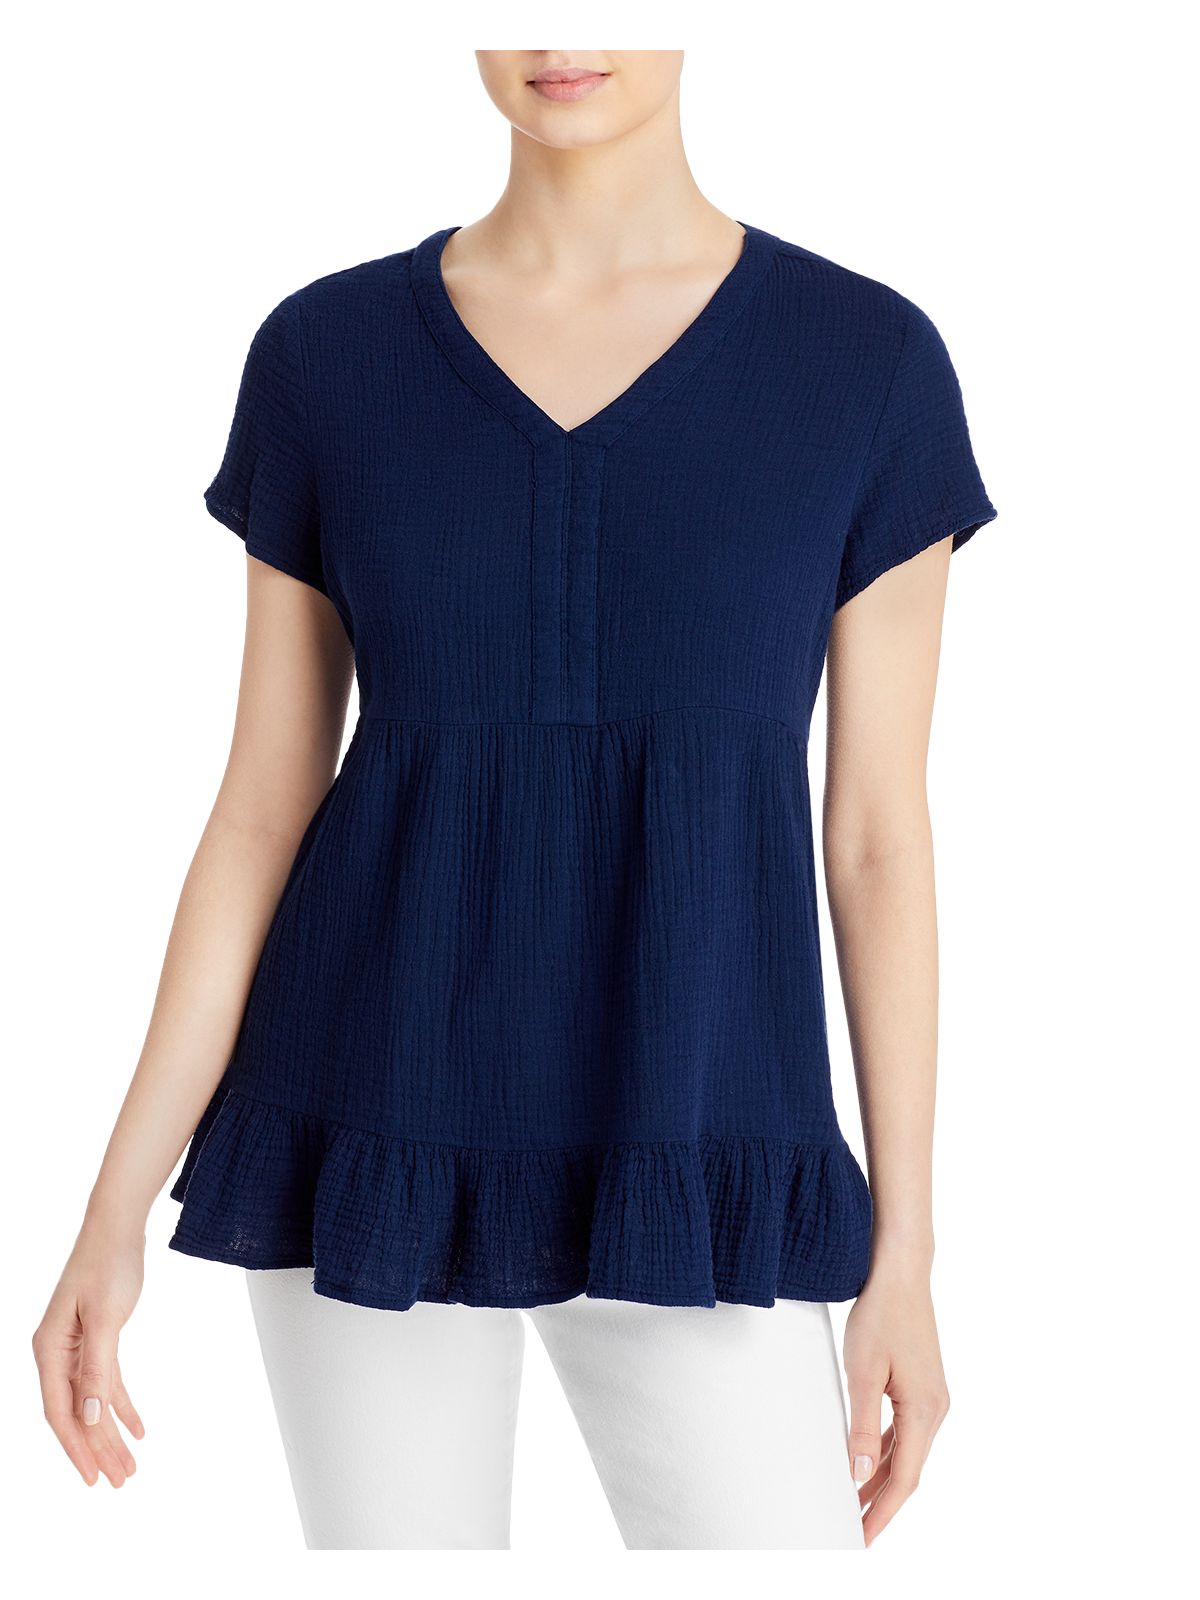 BEACHLUNCHLOUNGE COLLECTION Womens Navy Ruffled Tiered Short Sleeve V Neck Top XS